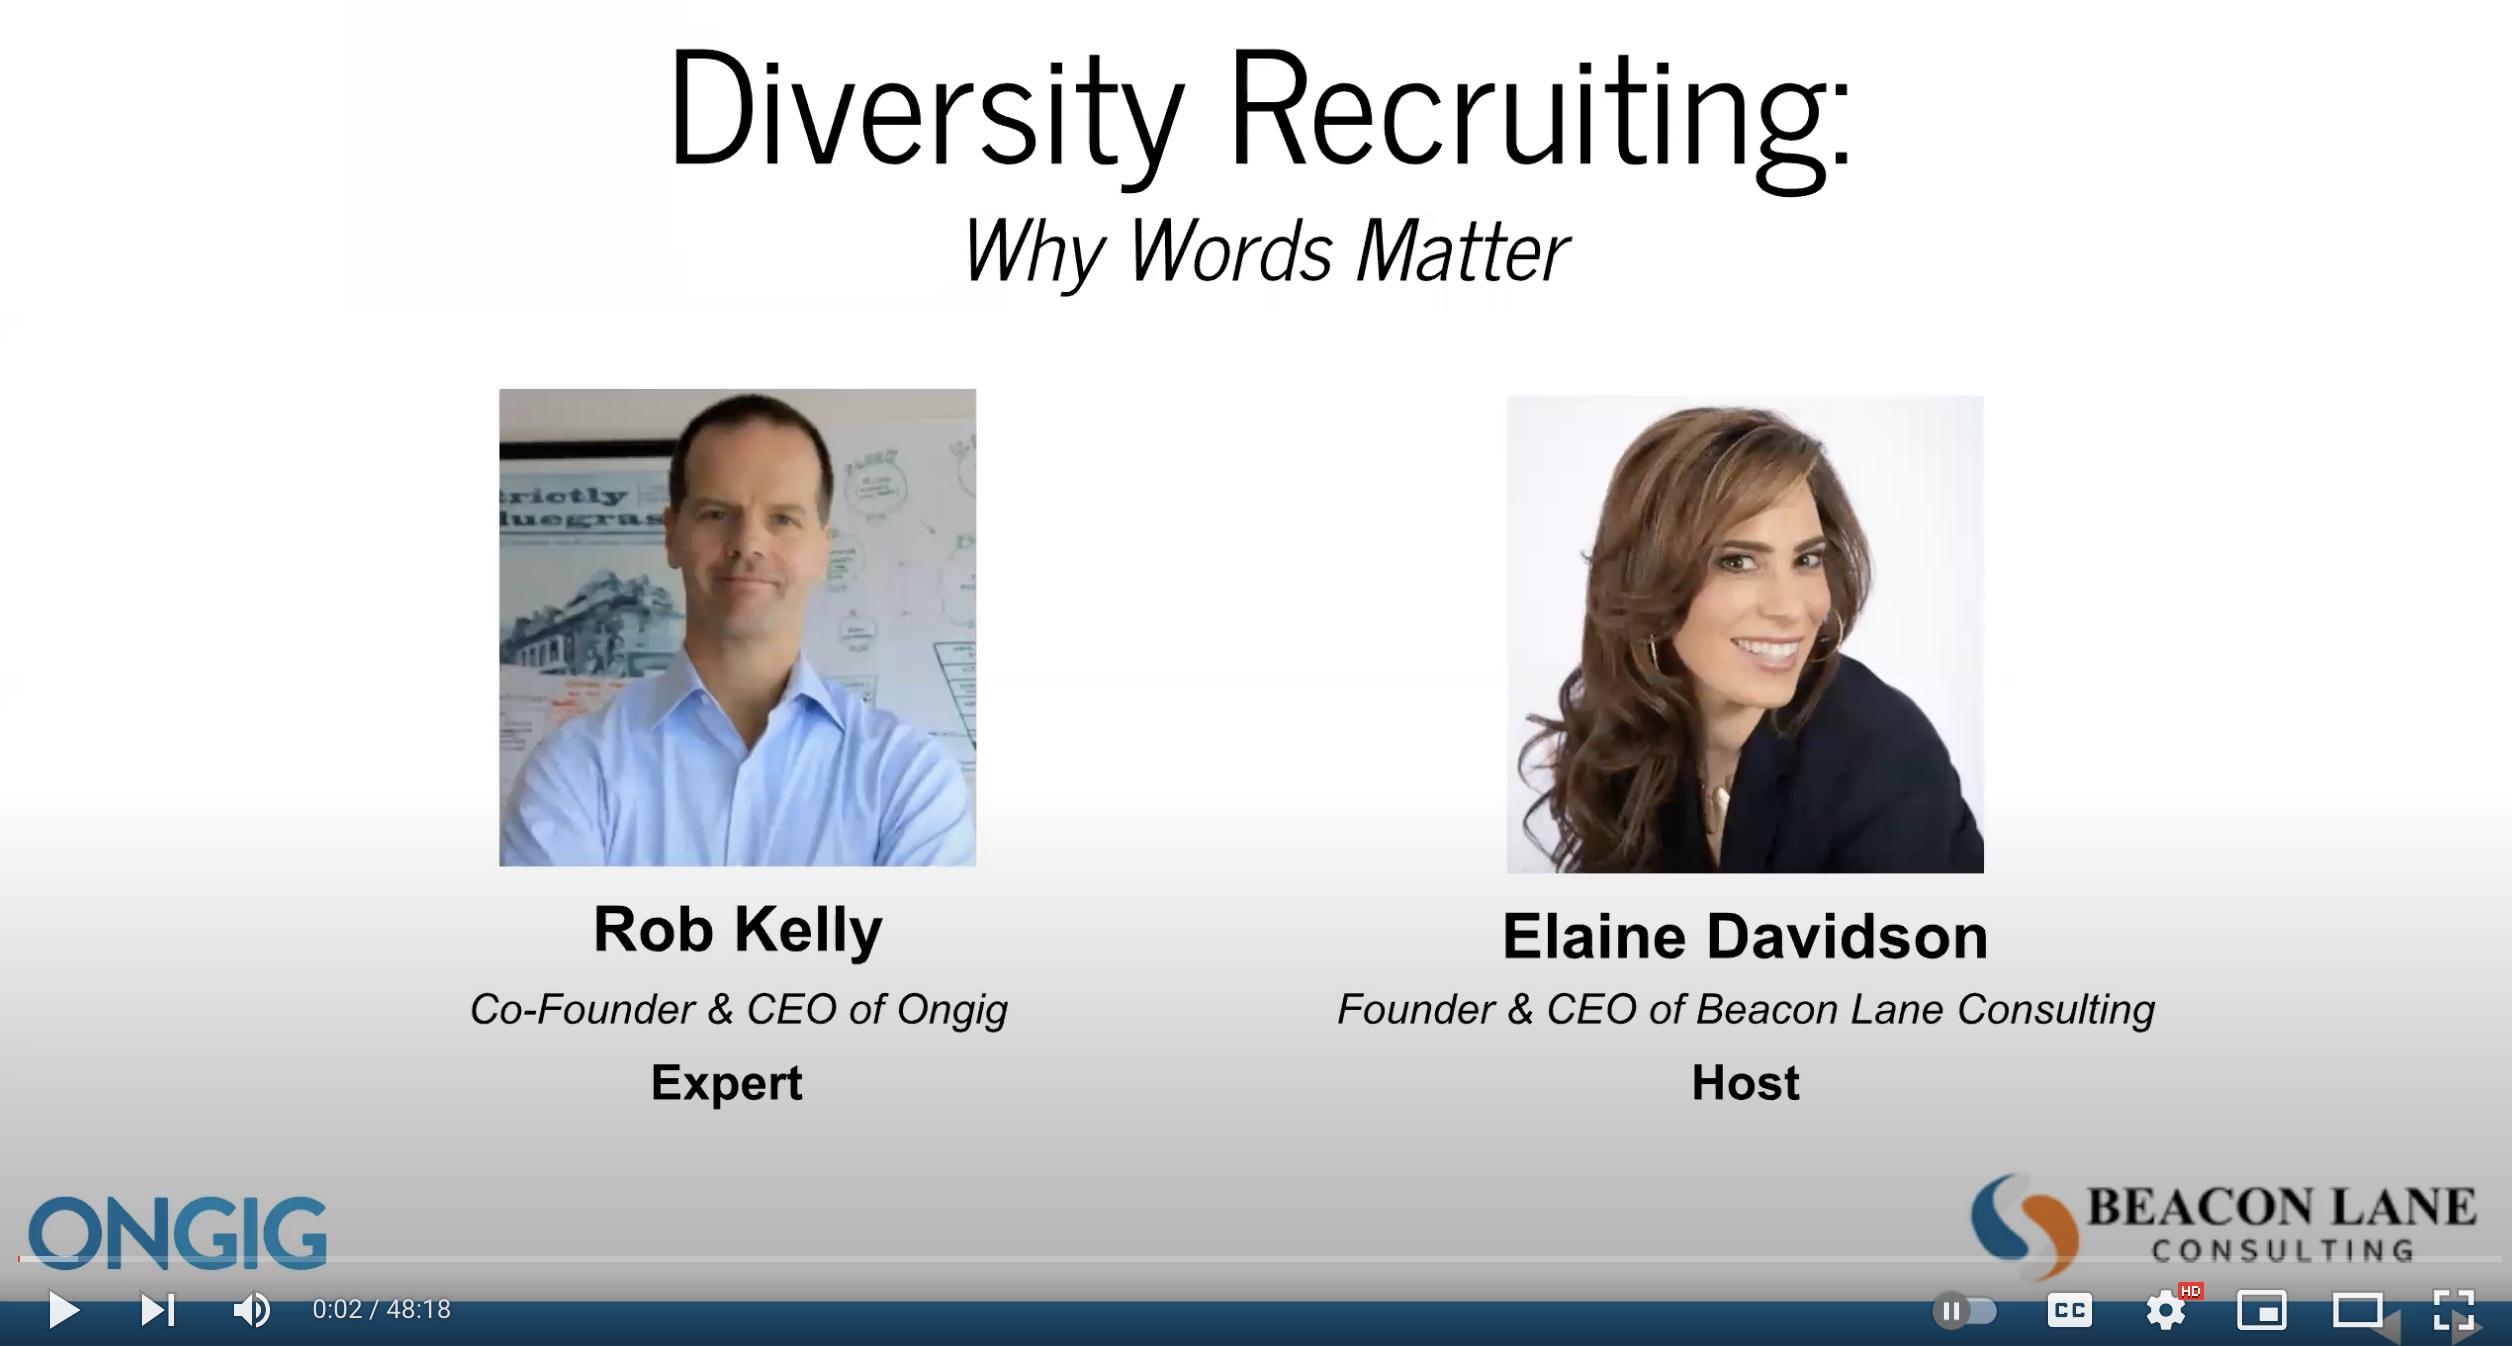 Diversity Recruiting: Why Words Matter